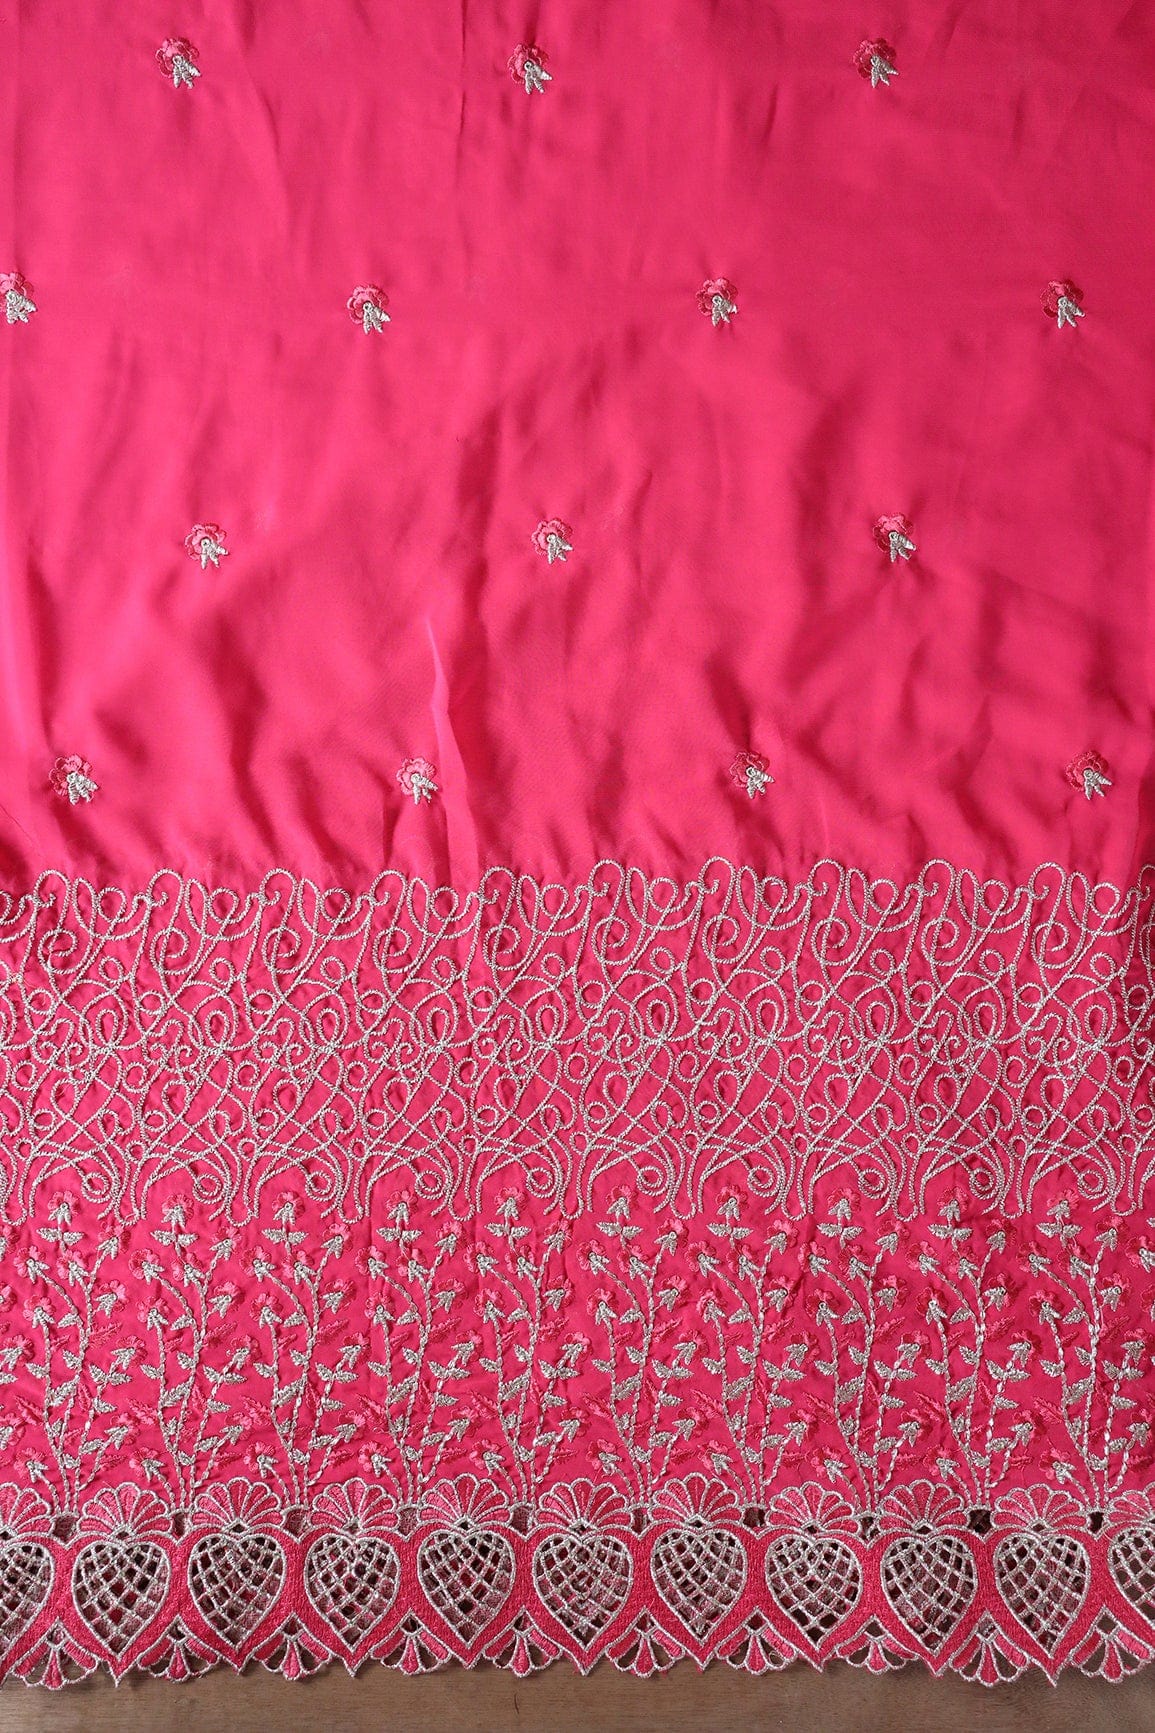 doeraa Embroidery Fabrics Big Width''56'' Pink Thread With Zari Floral Embroidery Work On Gajri Pink Georgette Fabric With Border